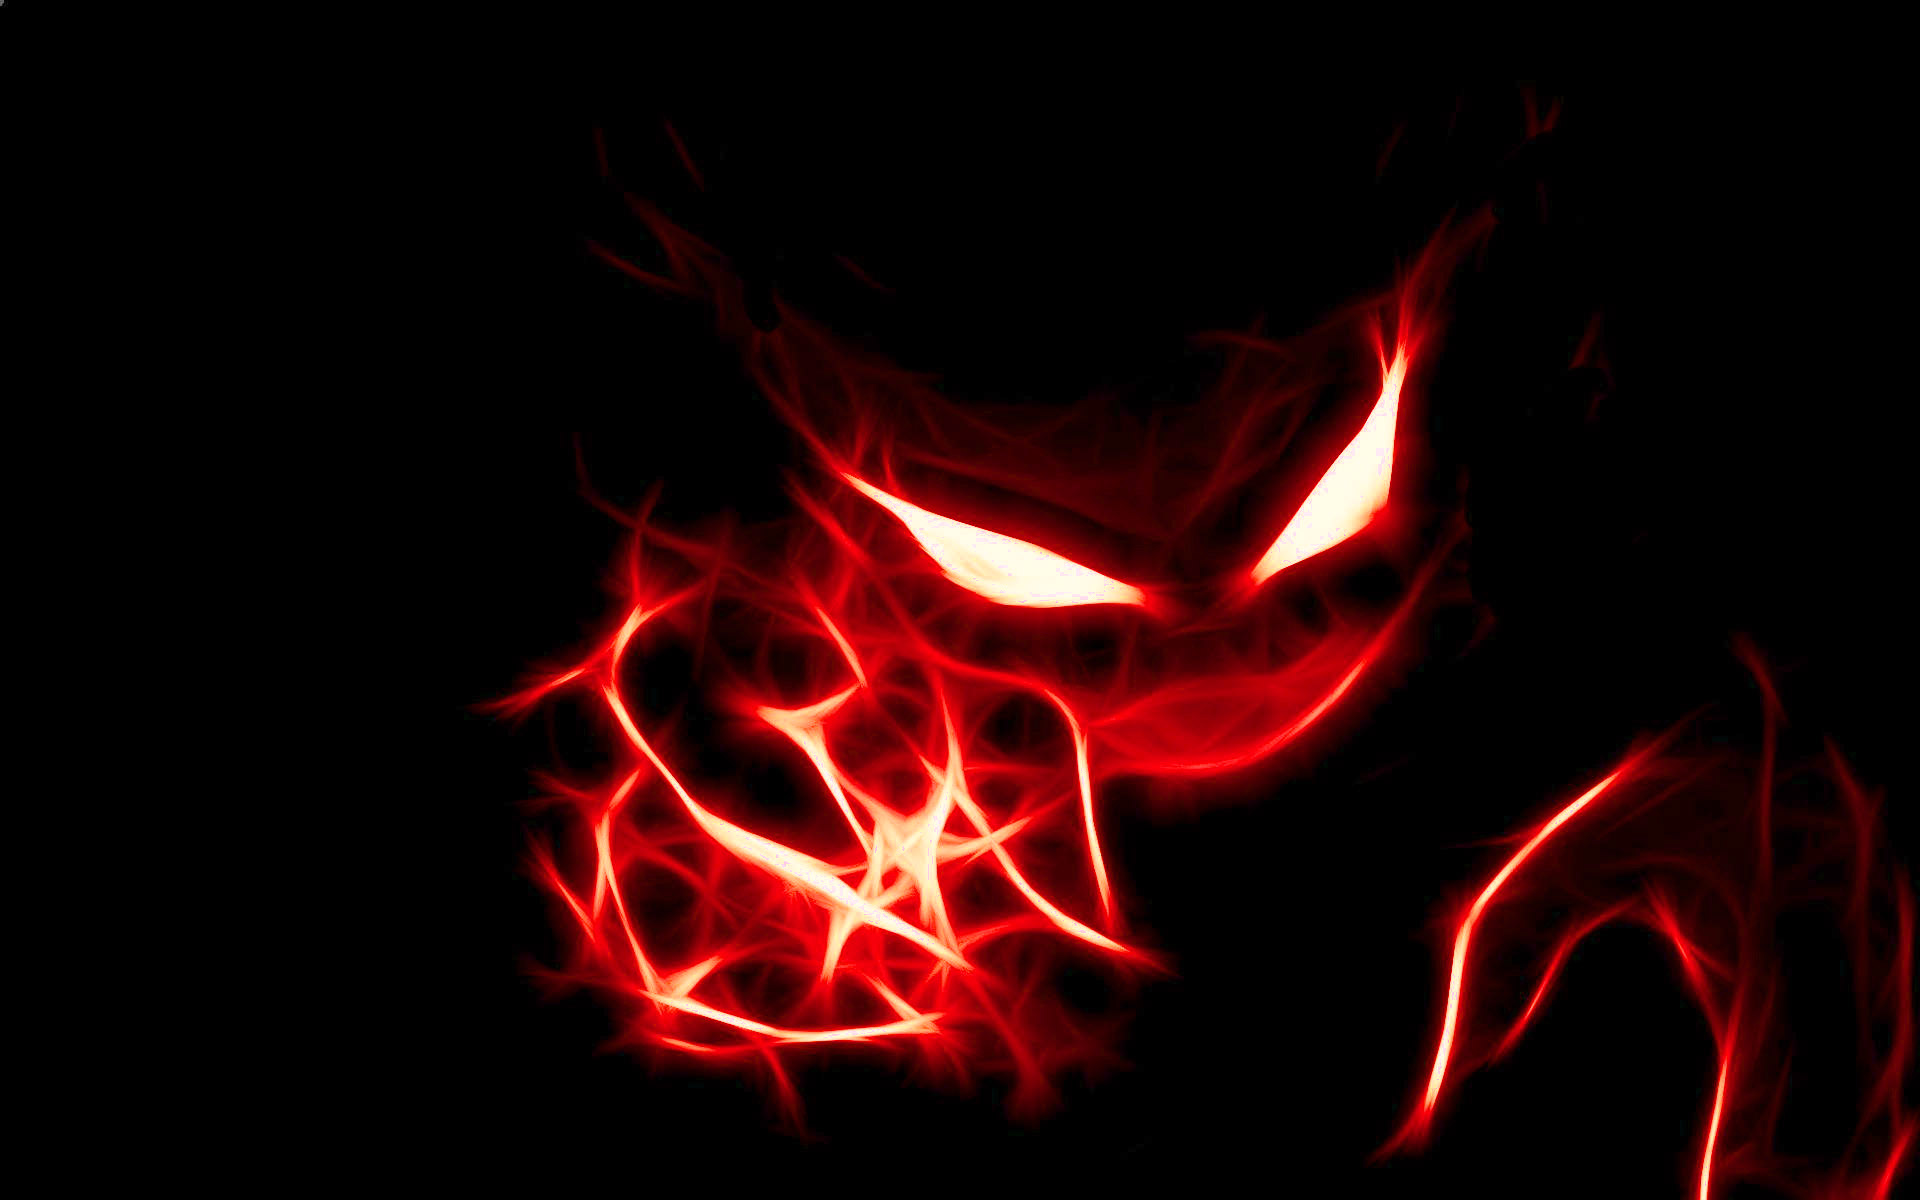  Awesome Red Haunter wallpaper   Reverse image search of Redditcom